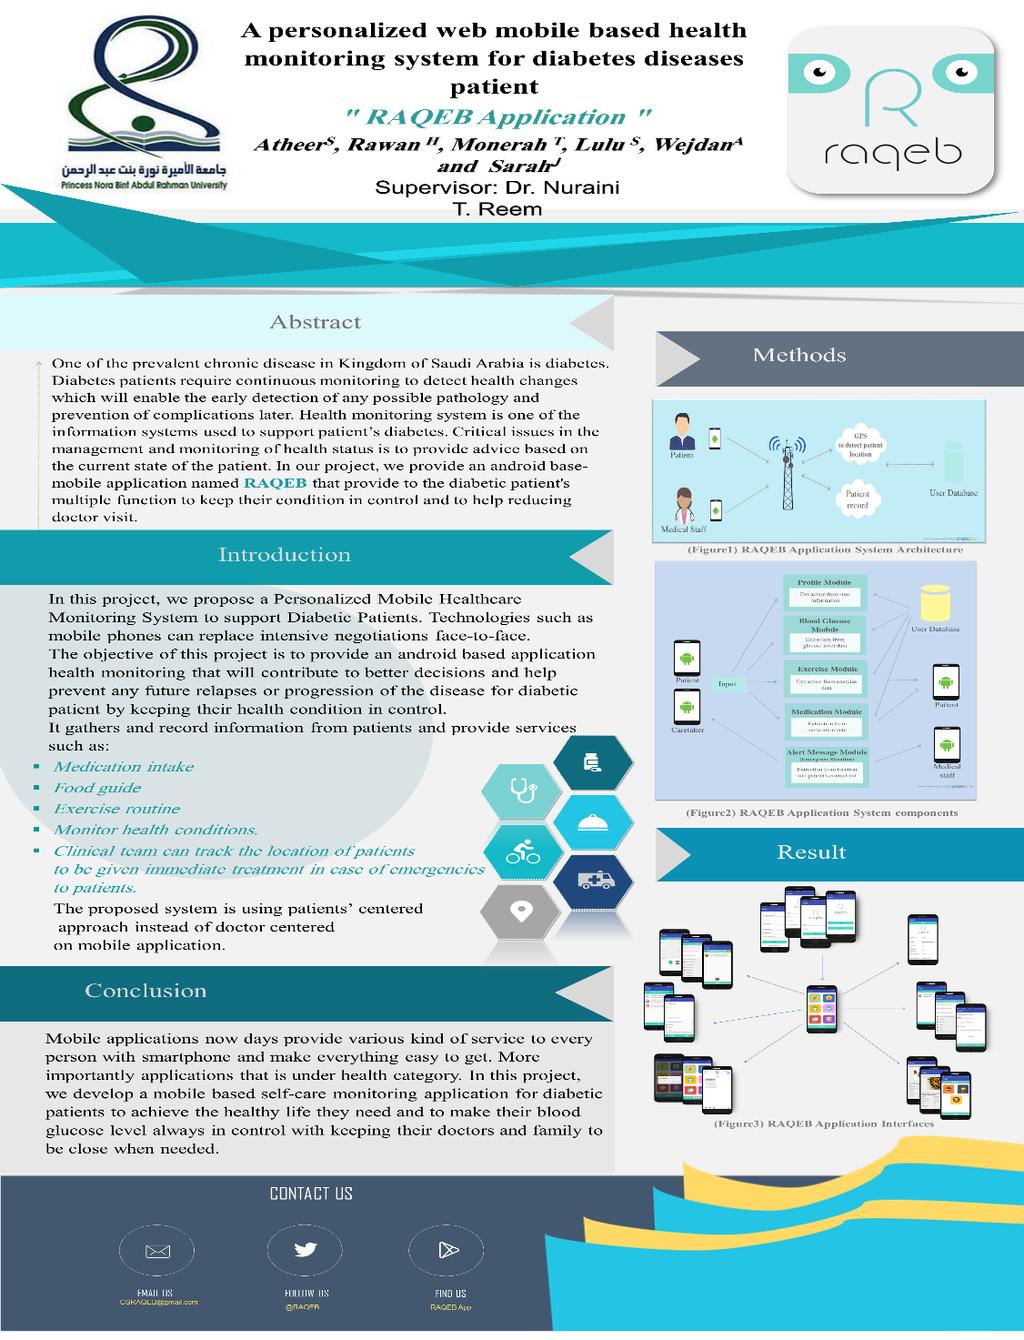 RAQEB Application (A Personalized Web Mobile Based Health Monitoring System for